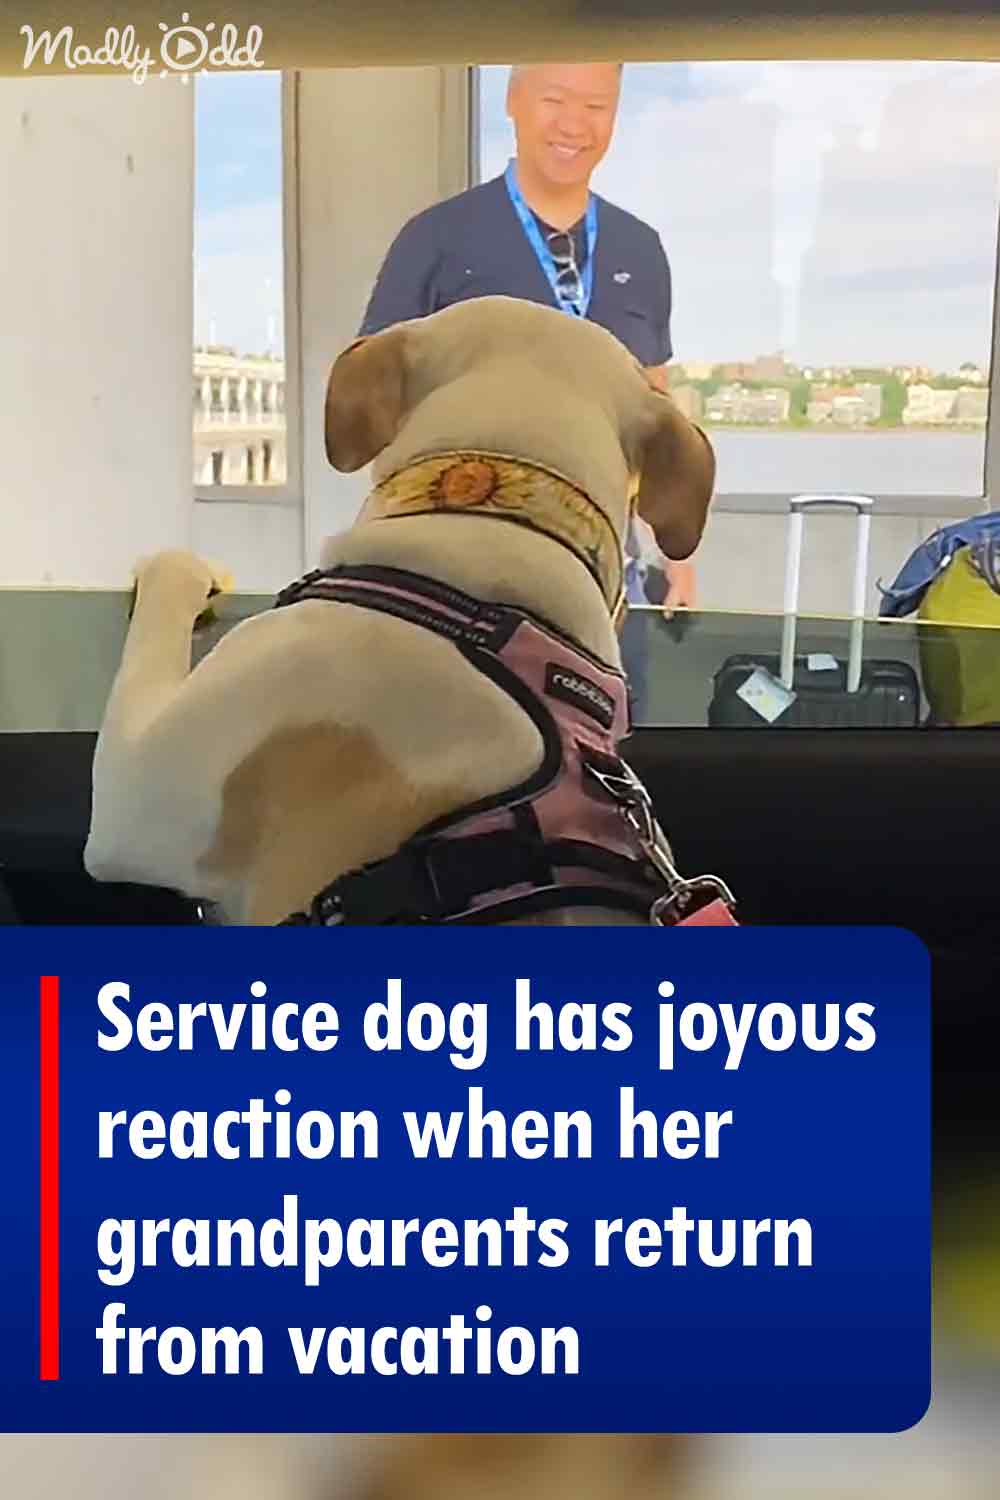 Service dog has joyous reaction when her grandparents return from vacation